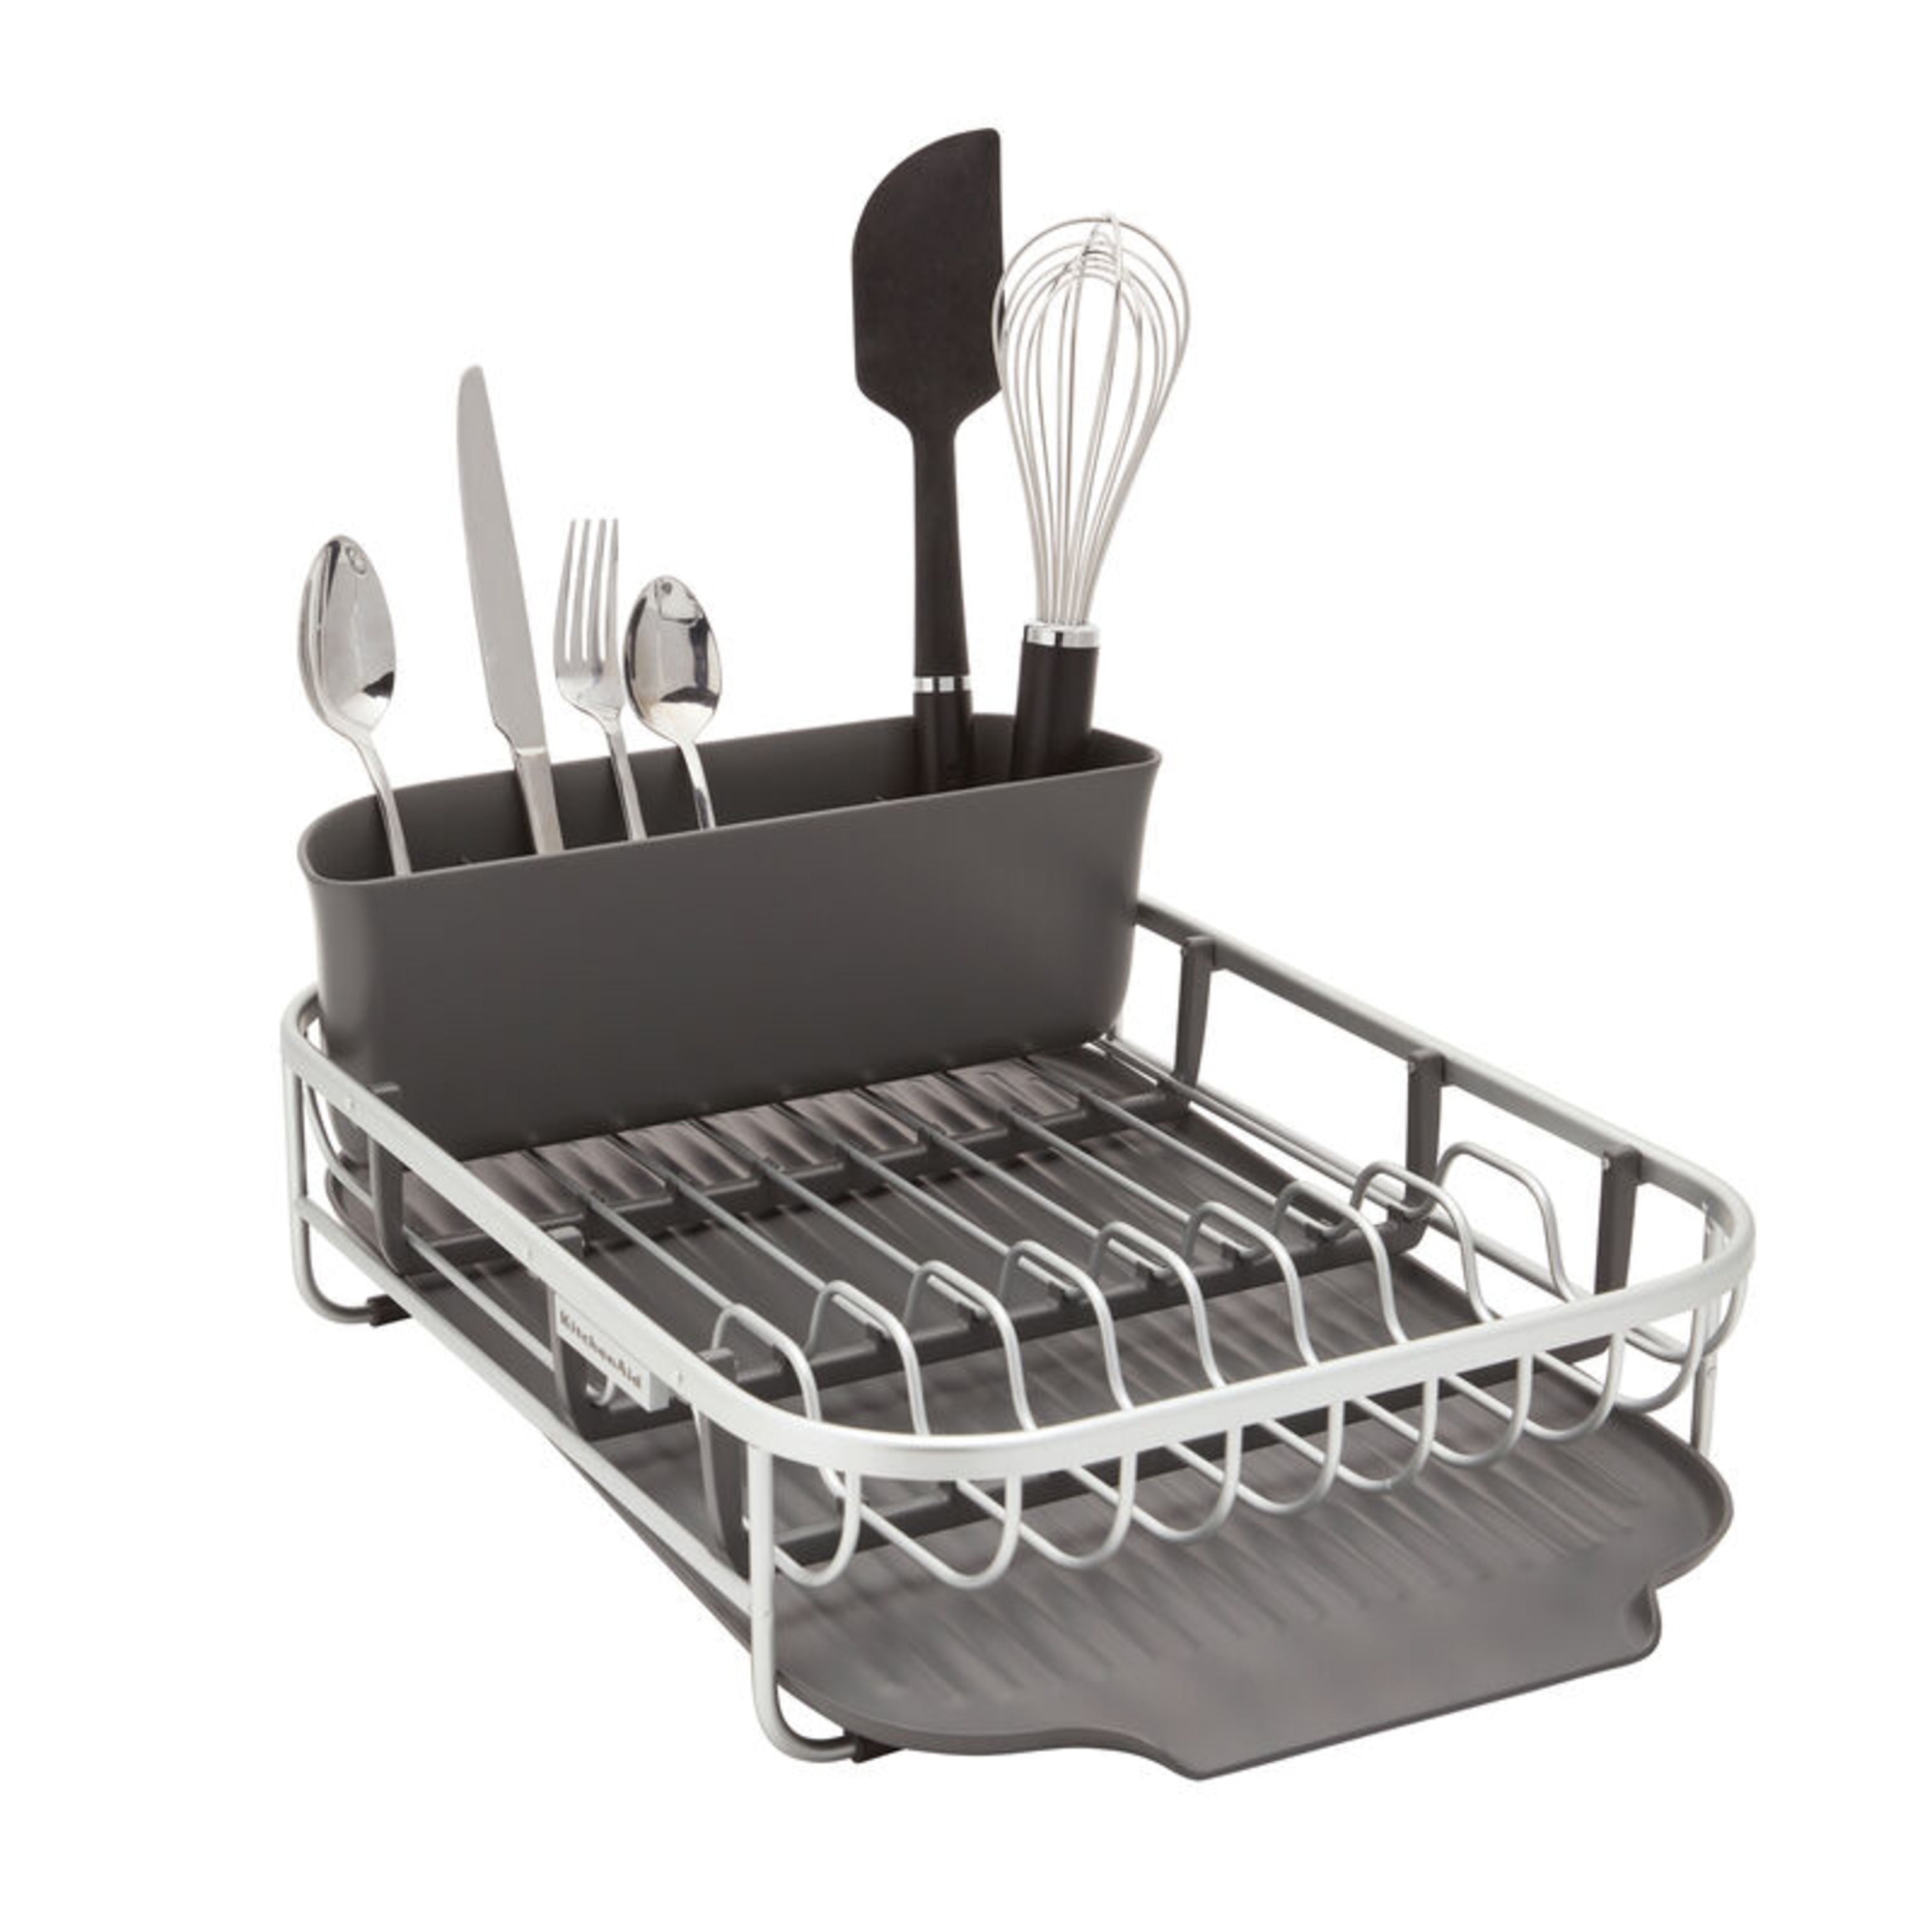 KitchenAid Compact Space Saving, Dish Rack with Removable Flatware Caddy  and Angled Self Draining Drainboard, Satin Gray, 15-Inch-by-13.25-Inch